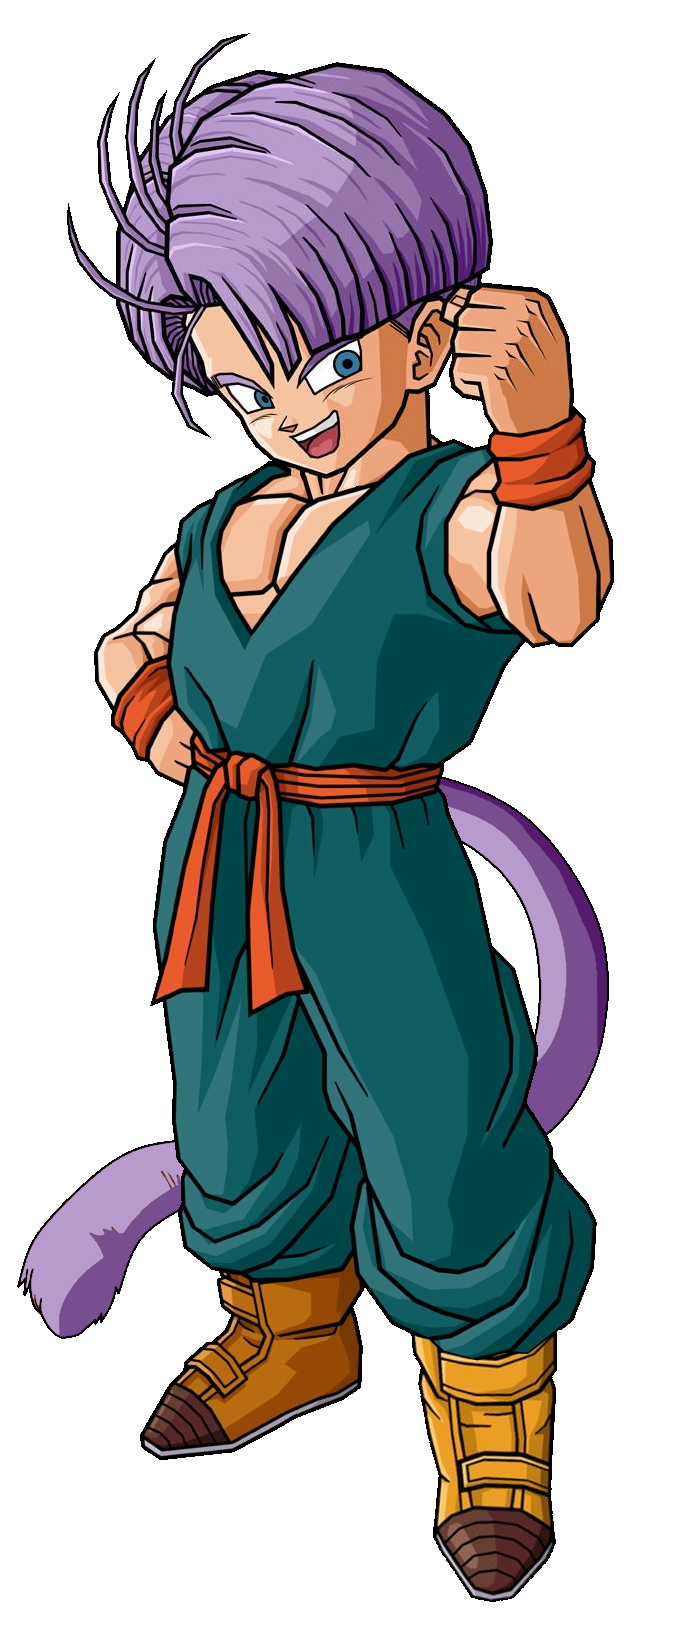 Kid Trunks (With Tail) by MajorLeagueGaminTrap on DeviantArt